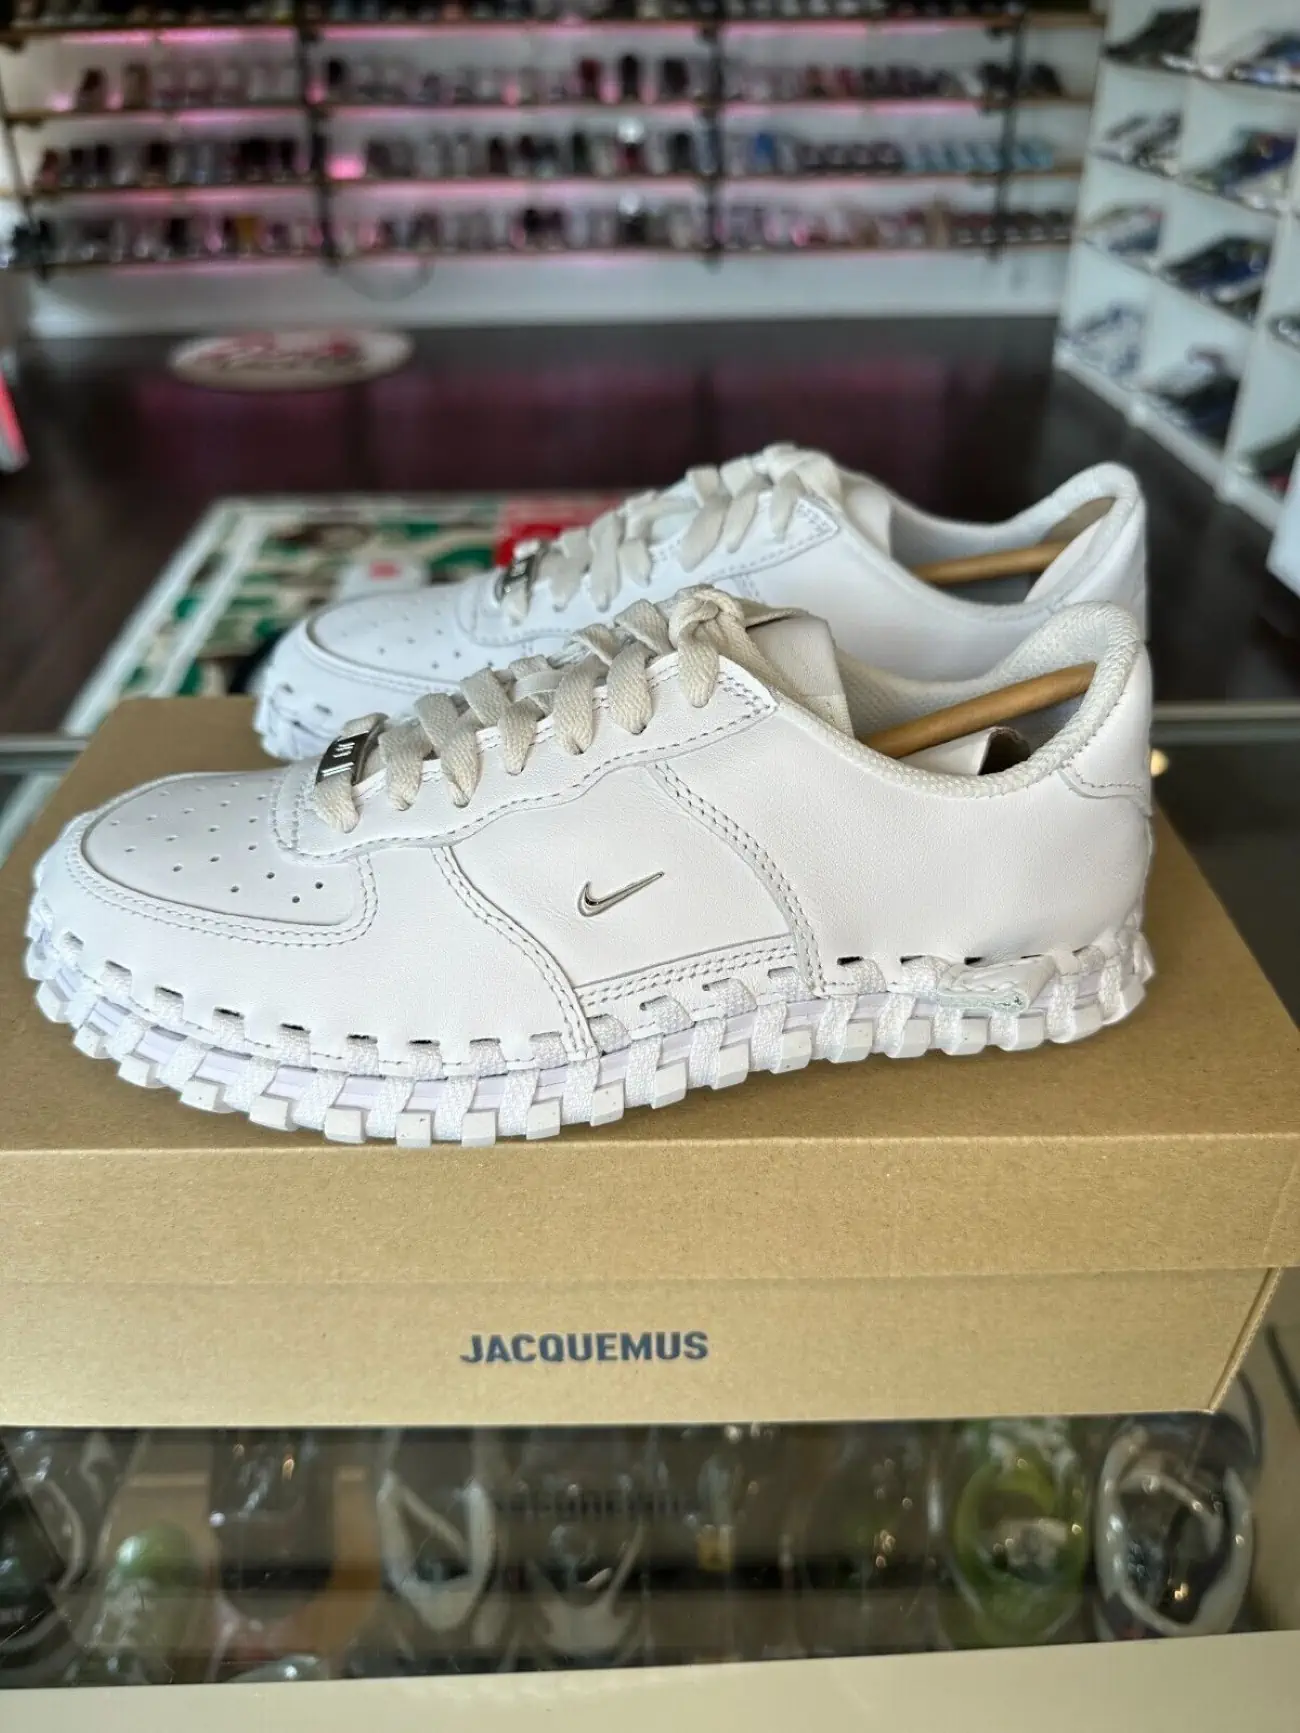 An early sneak peek into the Jacquemus x Nike J Force 1 Low collaboration